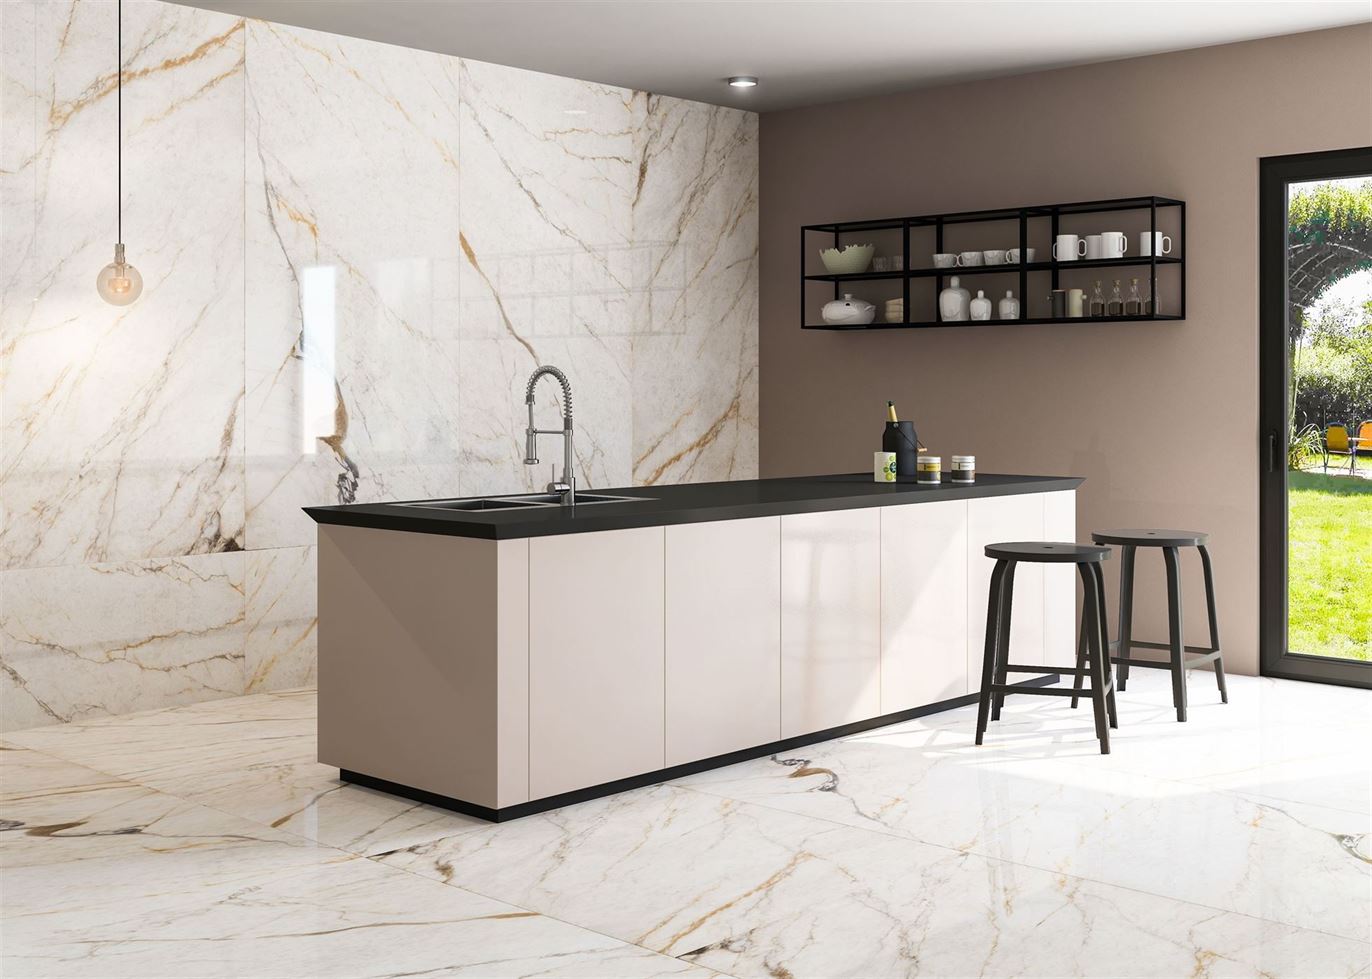 Revitalize Your Kitchen: Elevate Your Space with Stunning Geometric Tile Designs!